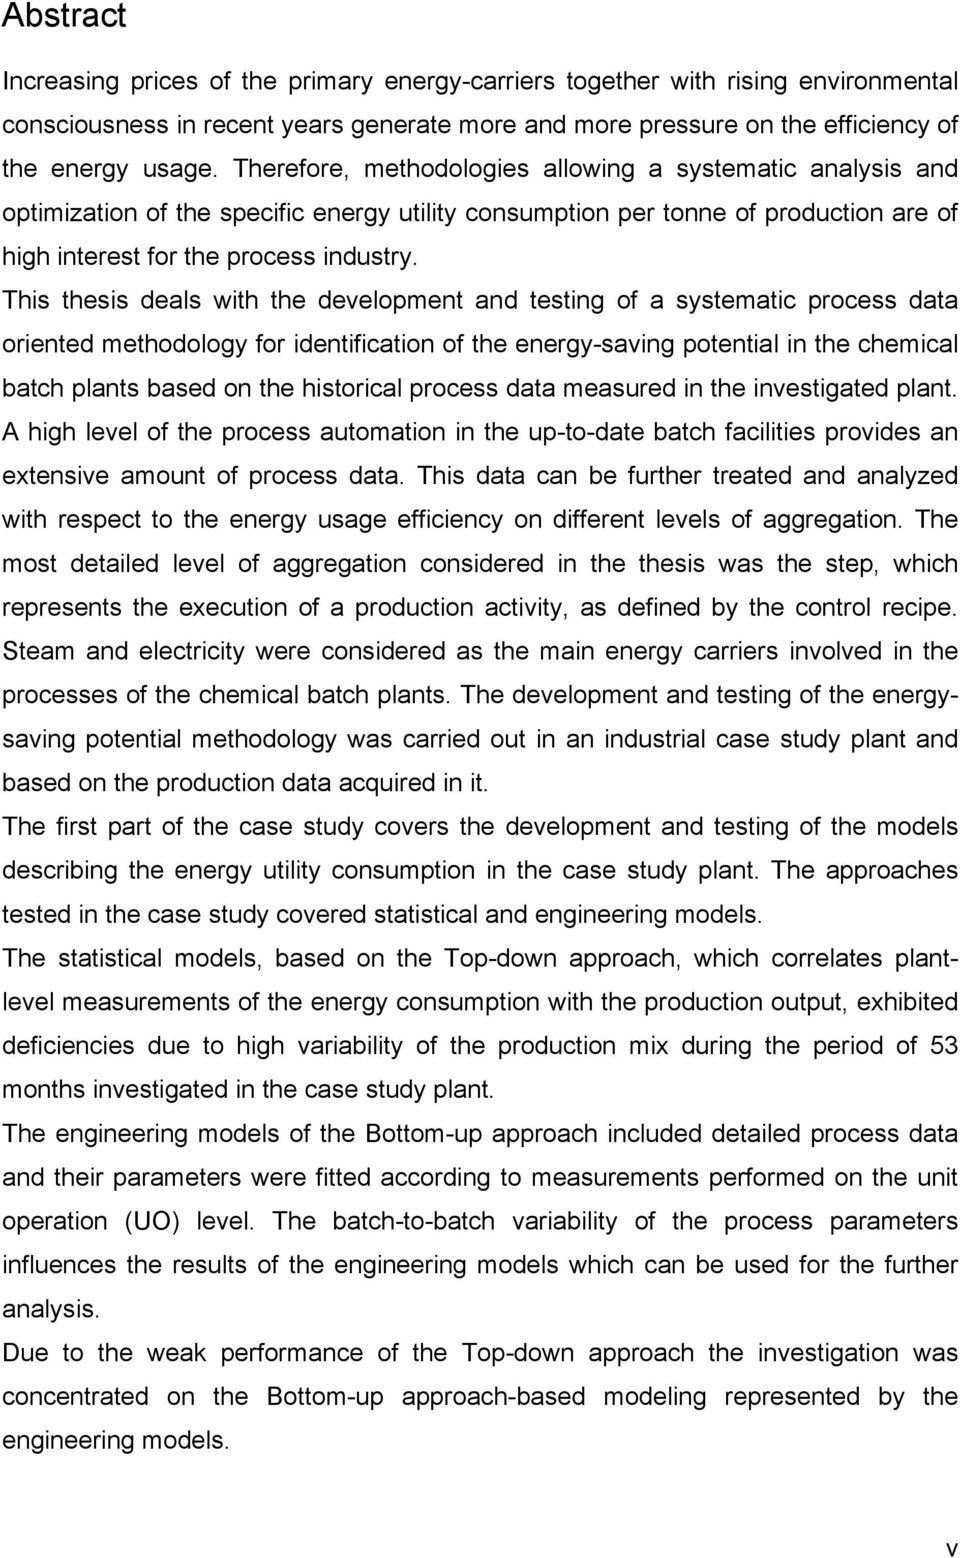 This thesis deals with the development and testing of a systematic process data oriented methodology for identification of the energy-saving potential in the chemical batch plants based on the